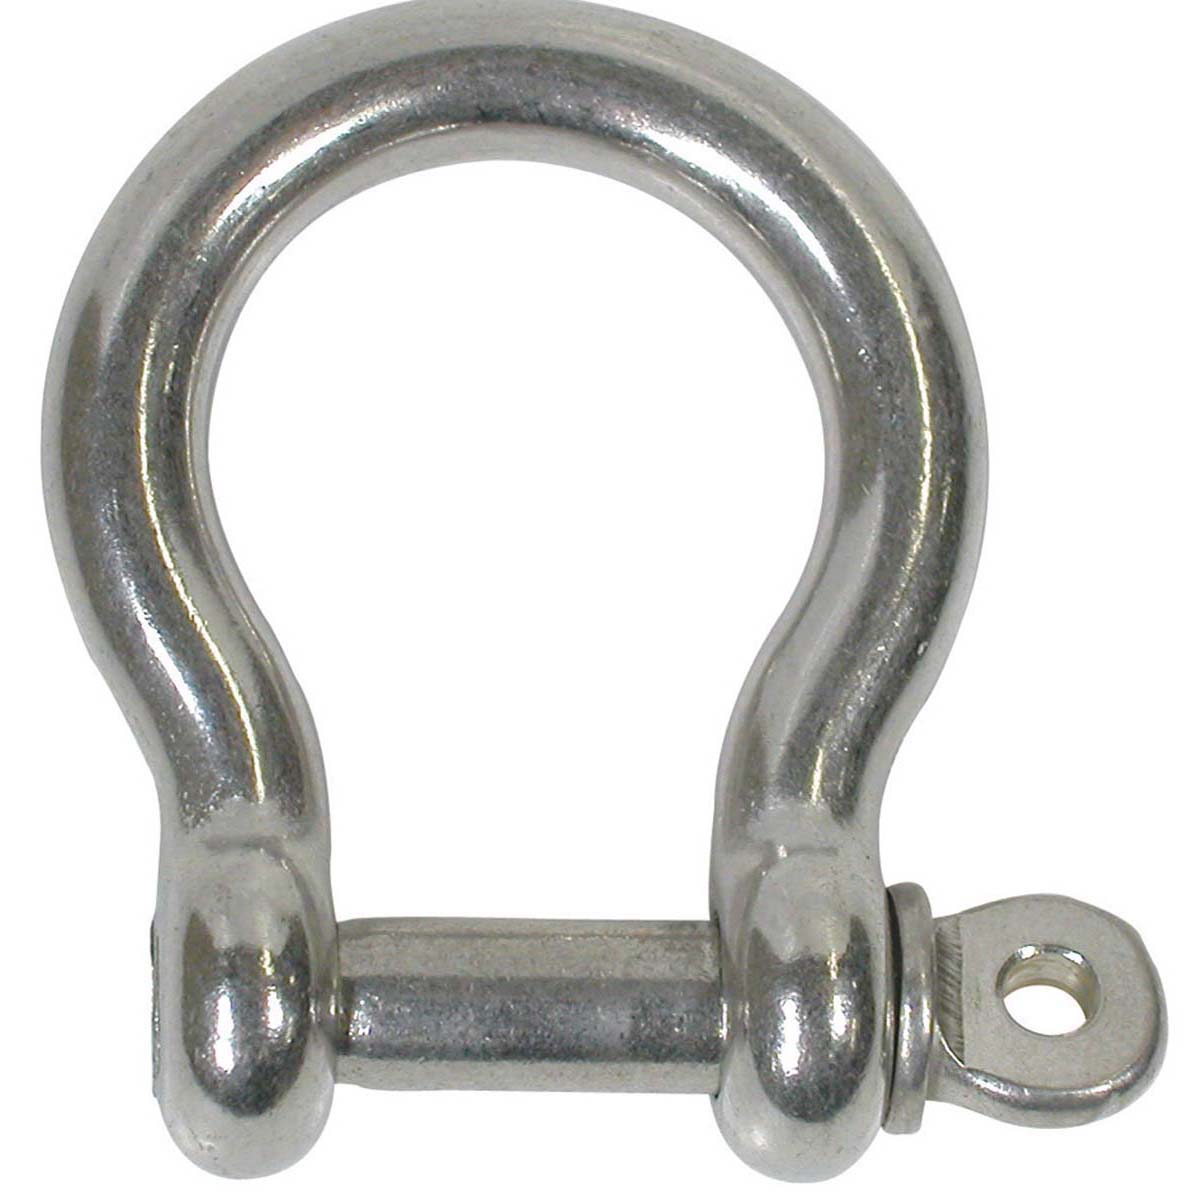 Blueline Stainless Steel Bow Shackle 10mm